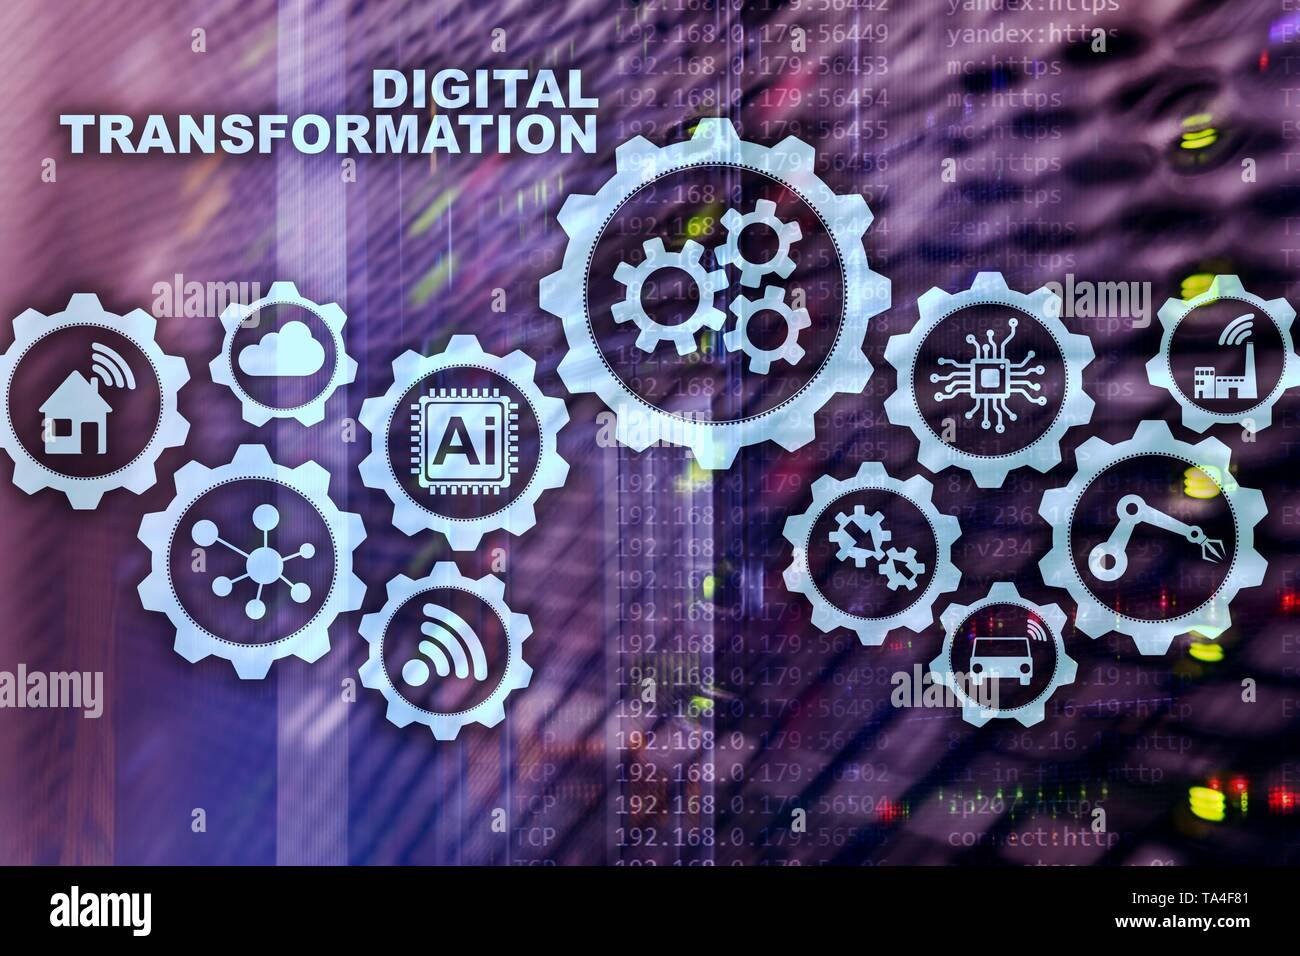 Digital Transformation Concept of digitalization of technology business processes. Datacenter background Stock Photo